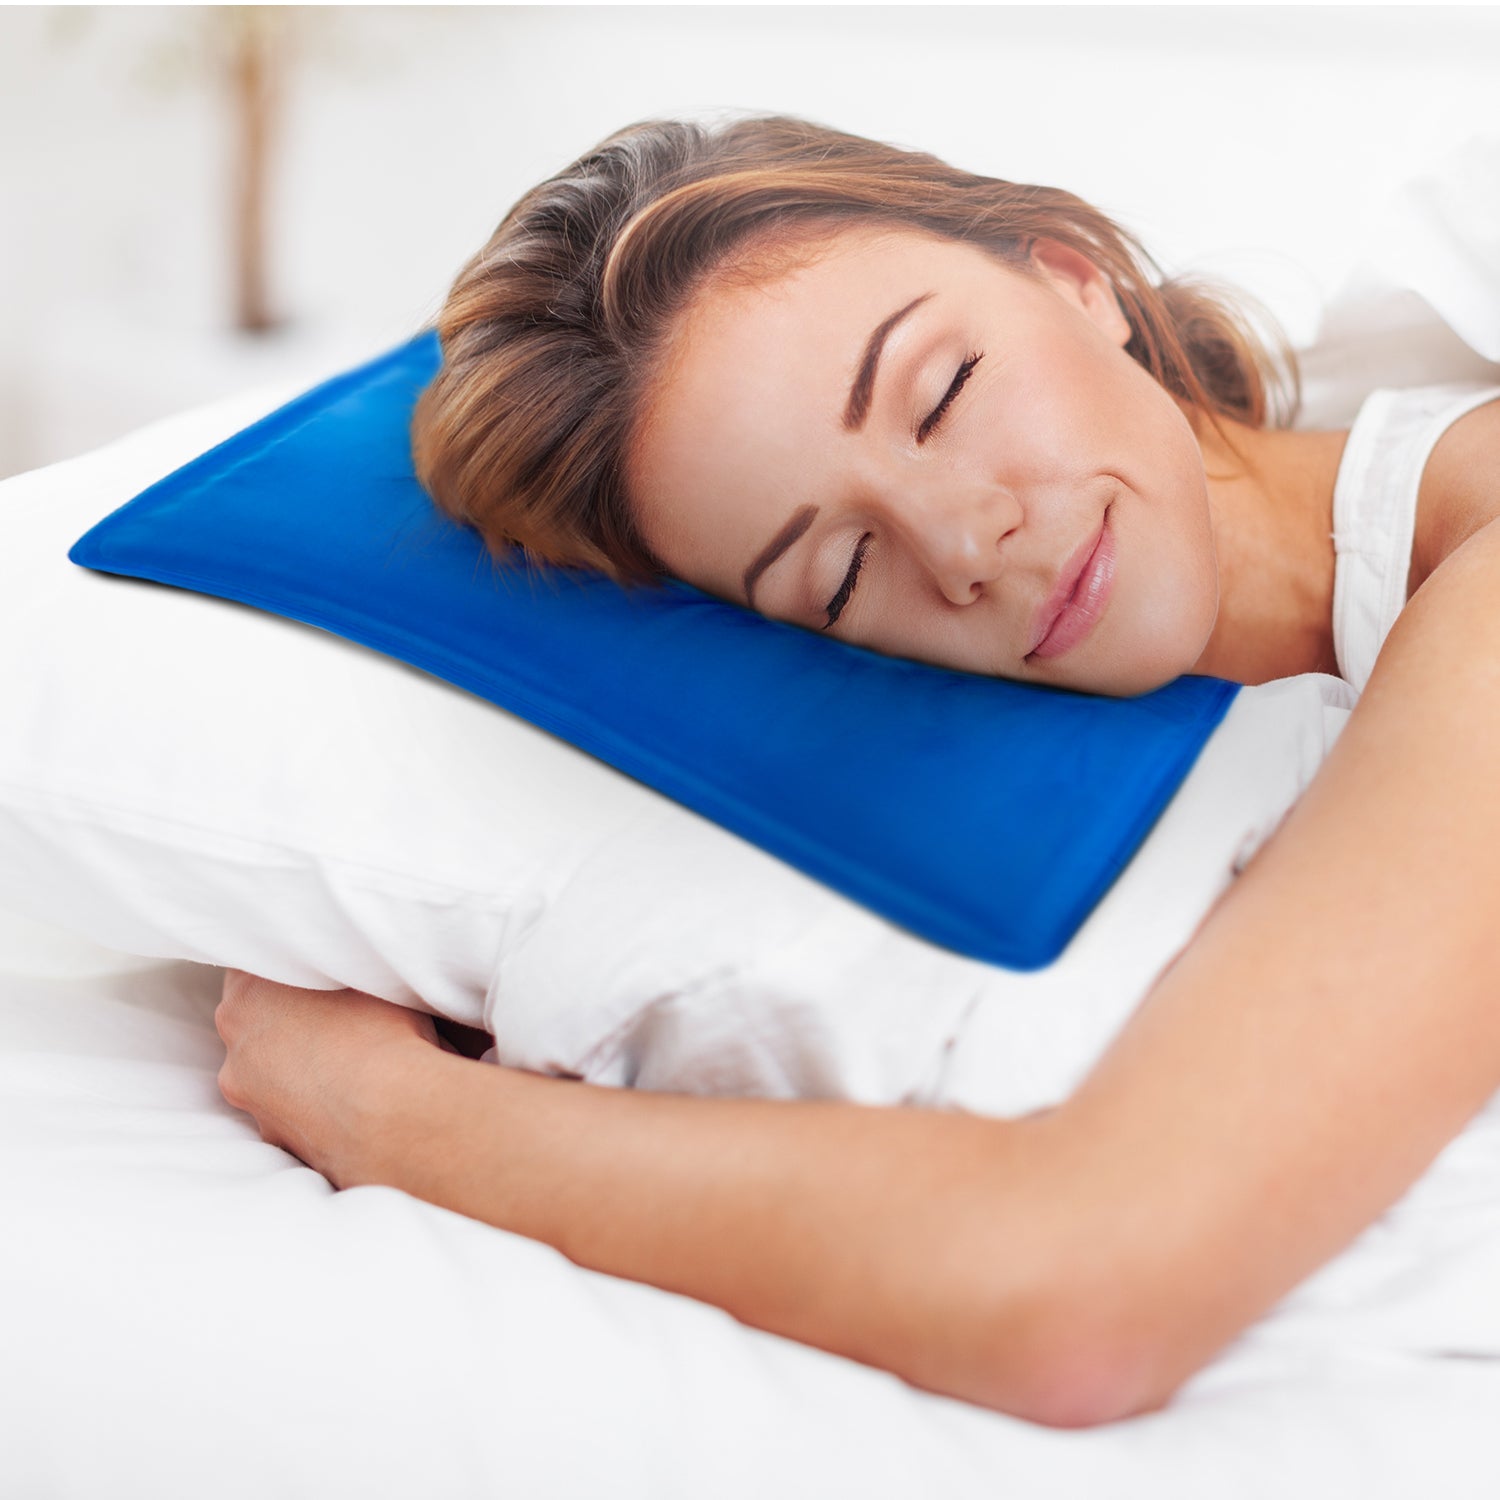 Cooling Gel Pillow Pads - Helps with Flu, Fevers, Migraine & Headaches and Improve Your Sleep